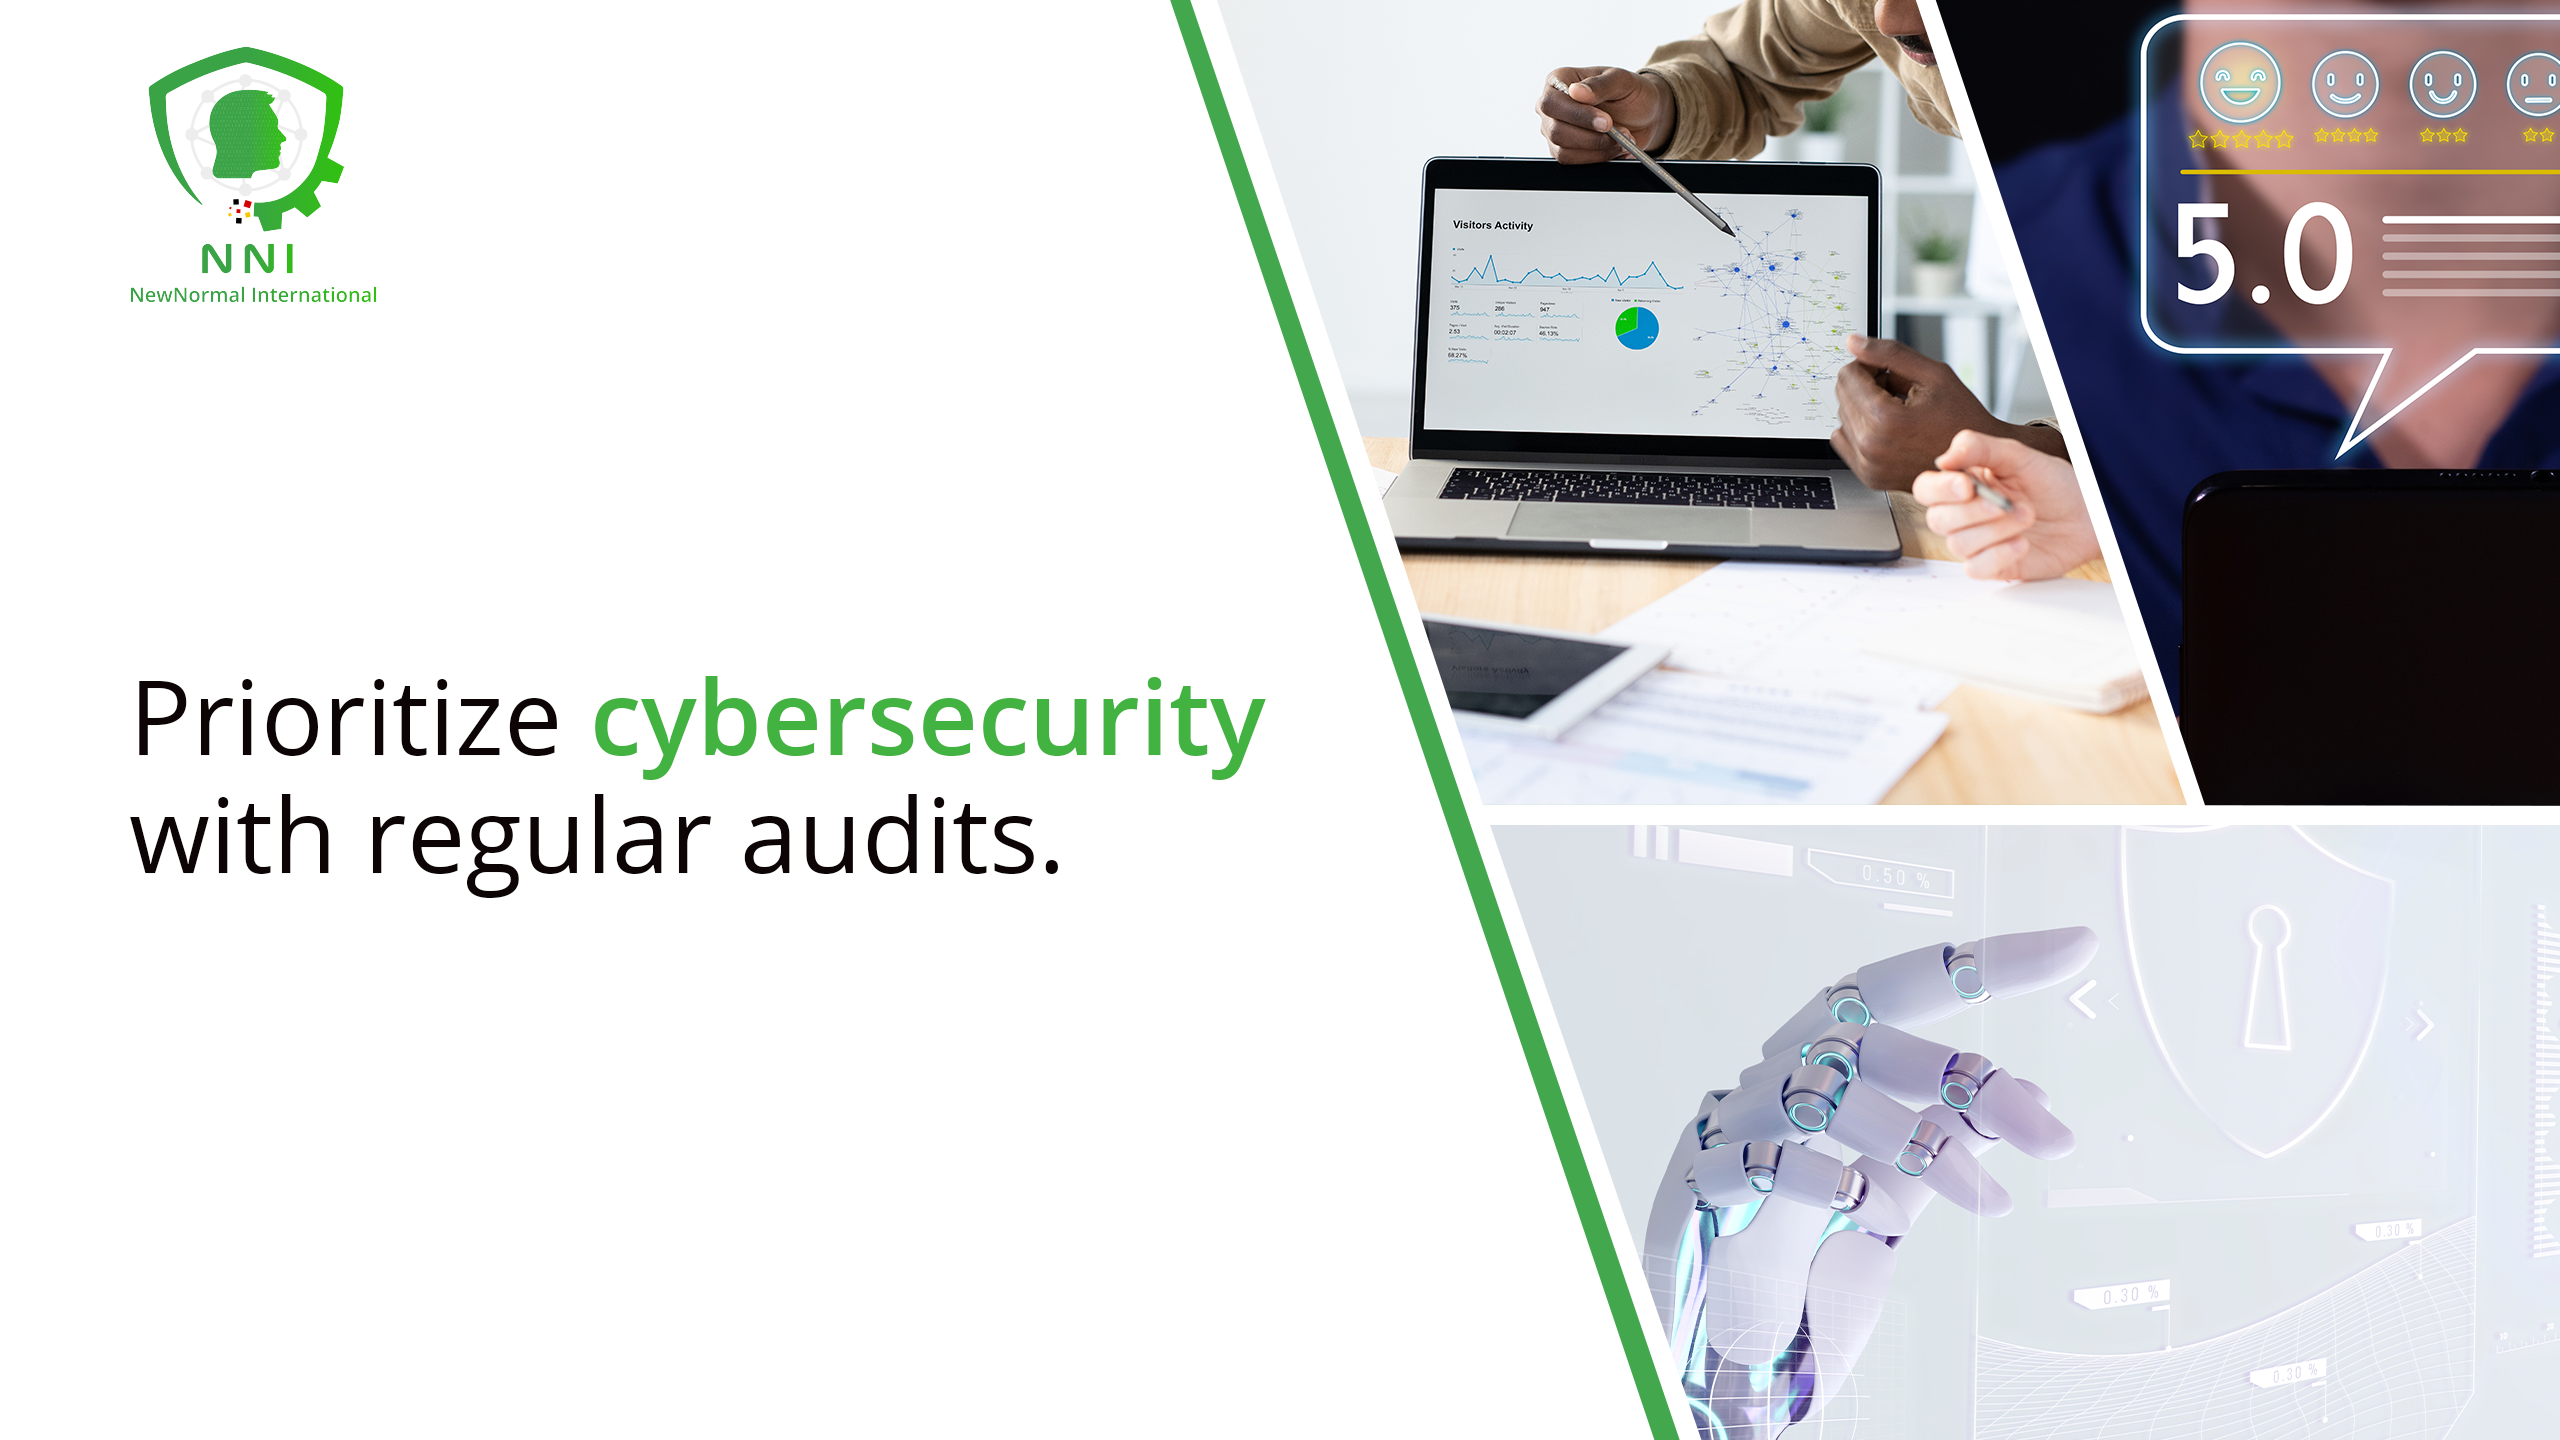 Cybersecurity with Regular Audits